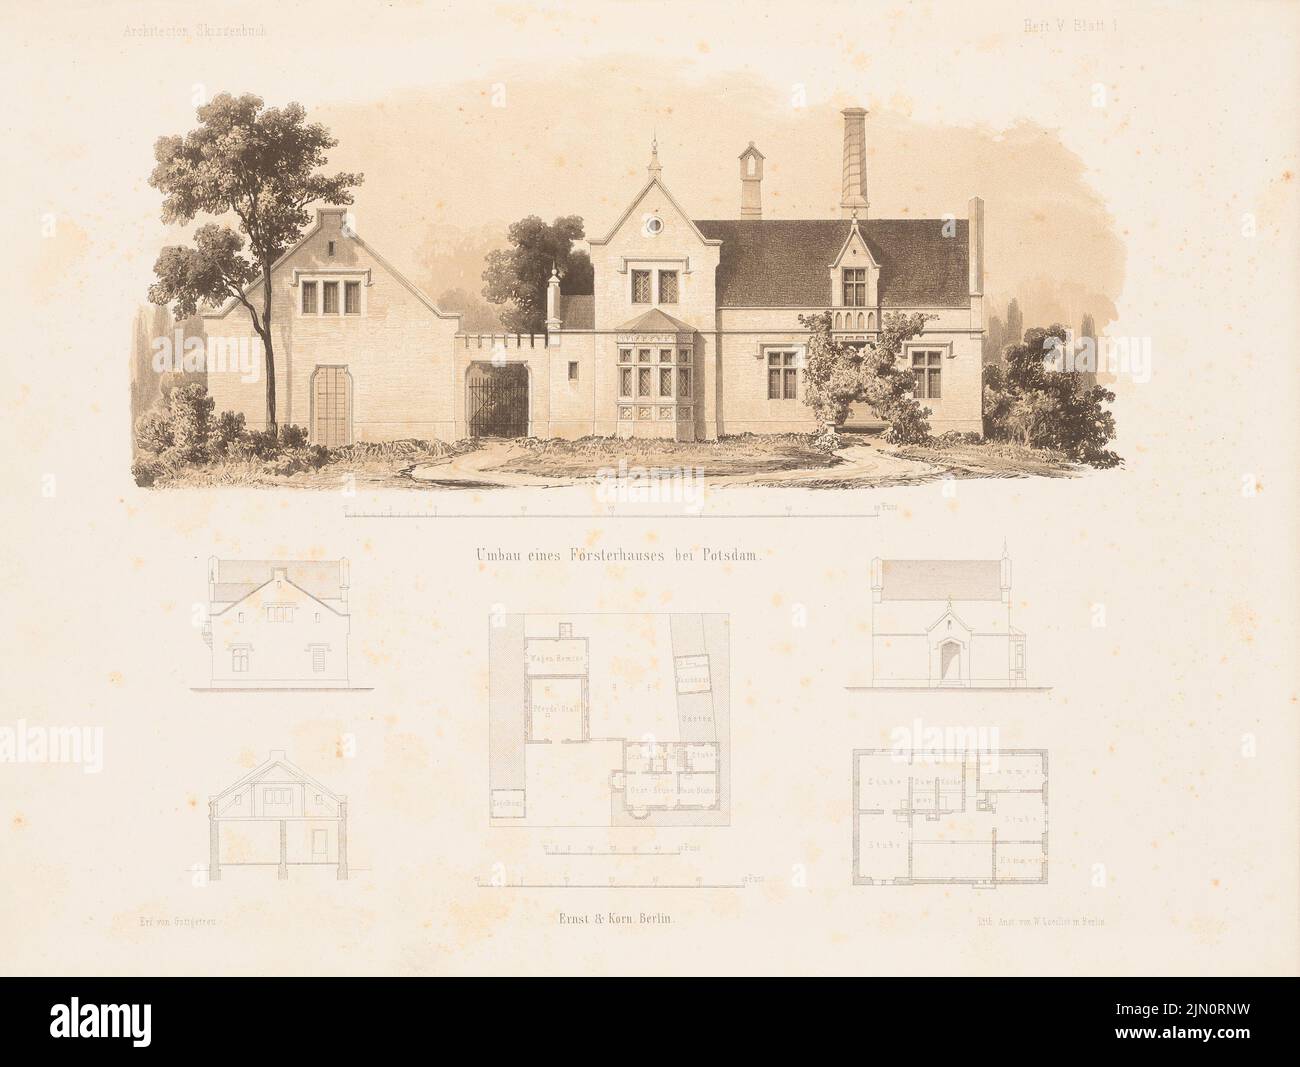 Gottgetreu Rudolf Wilhelm (1821-1890), conversion of a forester's house, Potsdam. (From: Architectural sketchbook, H. 5, 1852.) (1852-1852): site plan, floor plan, views, cross-section. Lithography colored on paper, 24.9 x 33.1 cm (including scan edges) Gottgetreu Rudolf Wilhelm  (1821-1890): Umbau eines Försterhauses, Potsdam. (Aus: Architektonisches Skizzenbuch, H. 5, 1852) Stock Photo